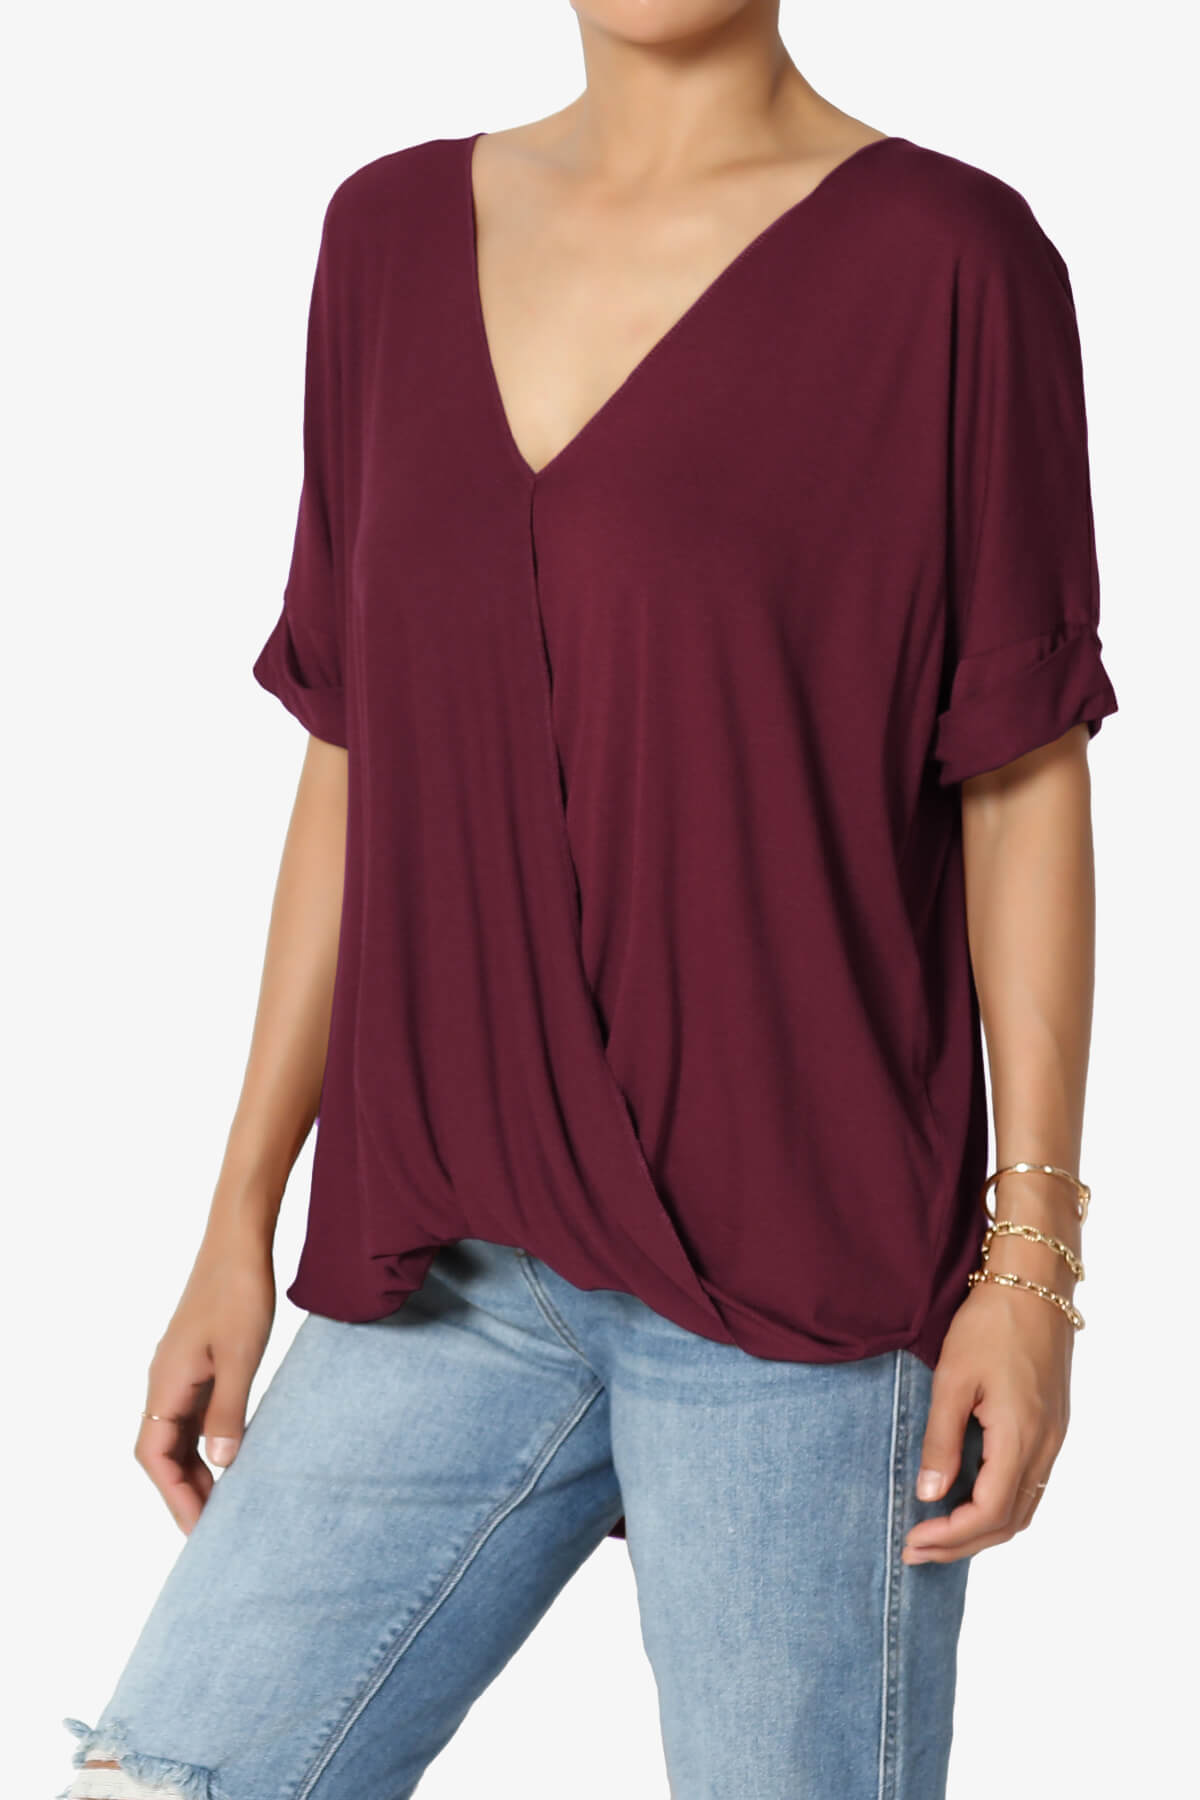 Load image into Gallery viewer, Tackle Wrap Hi-Low Crepe Knit Top DARK BURGUNDY_3
